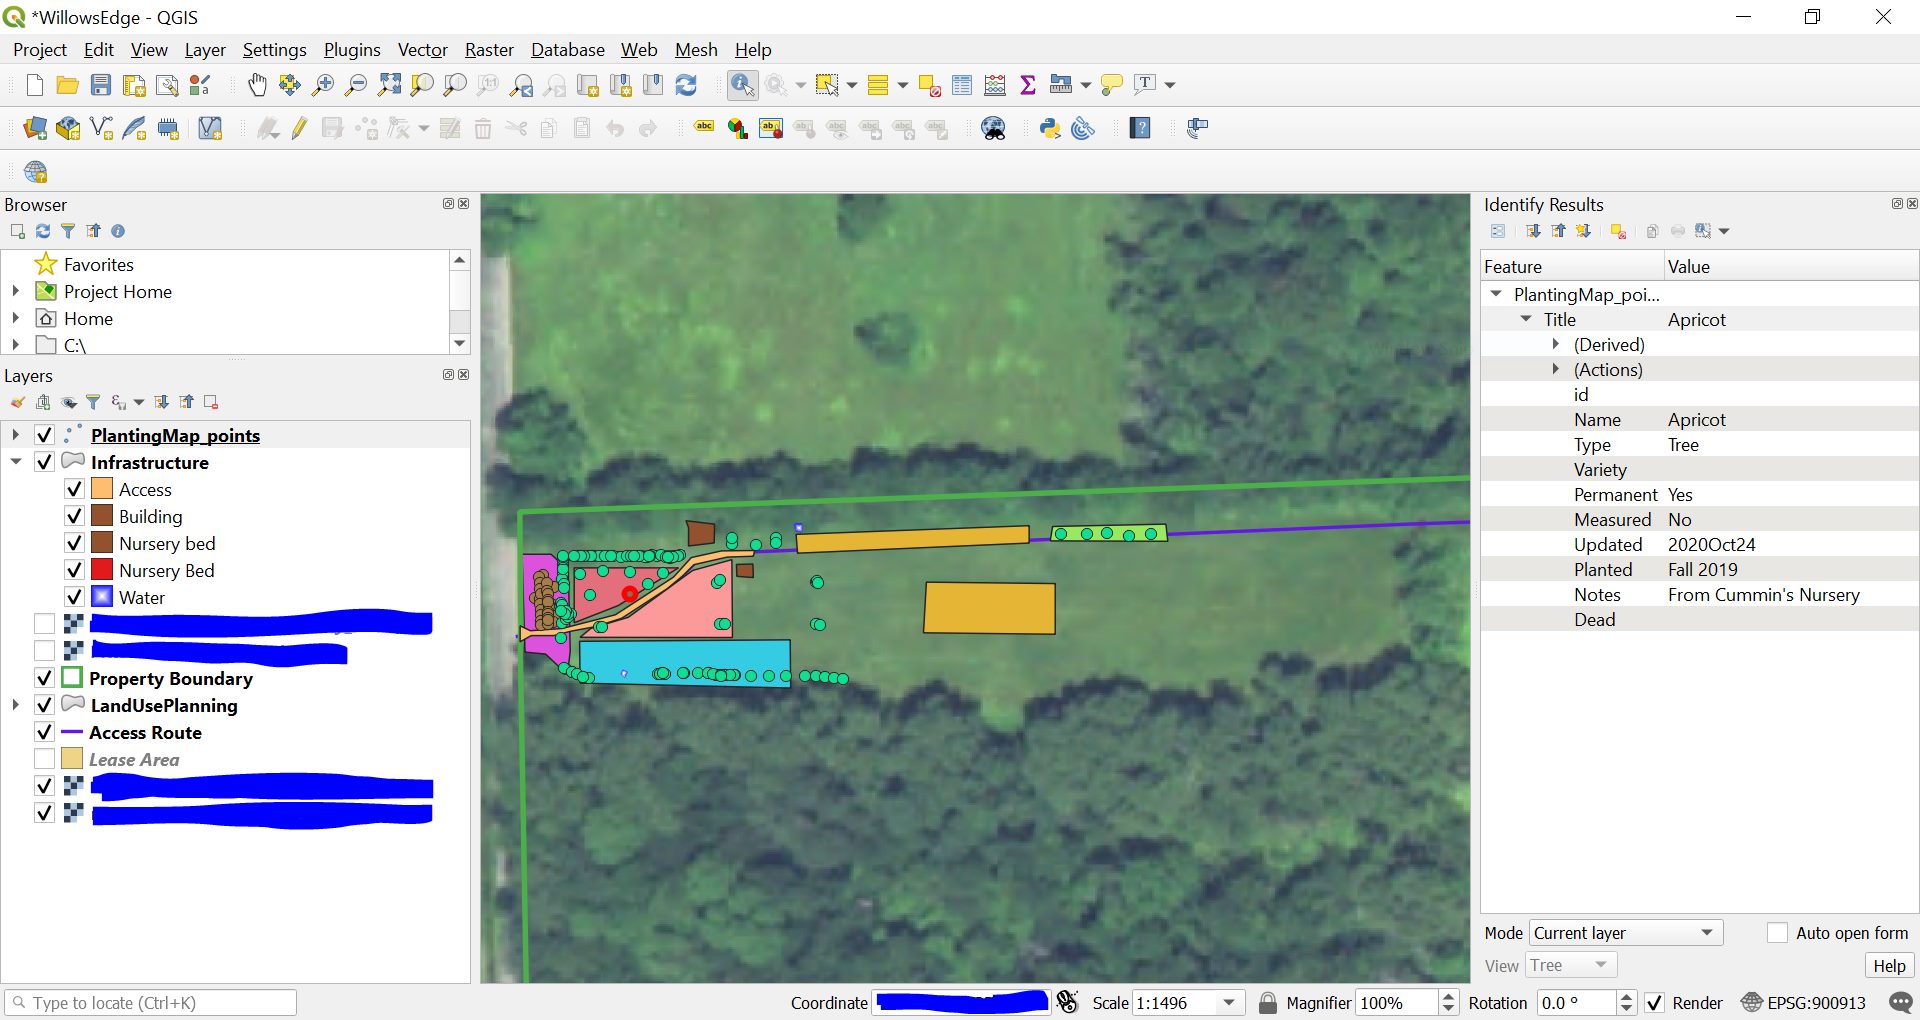 Screenshot of QGIS in use for agroforestry mapping